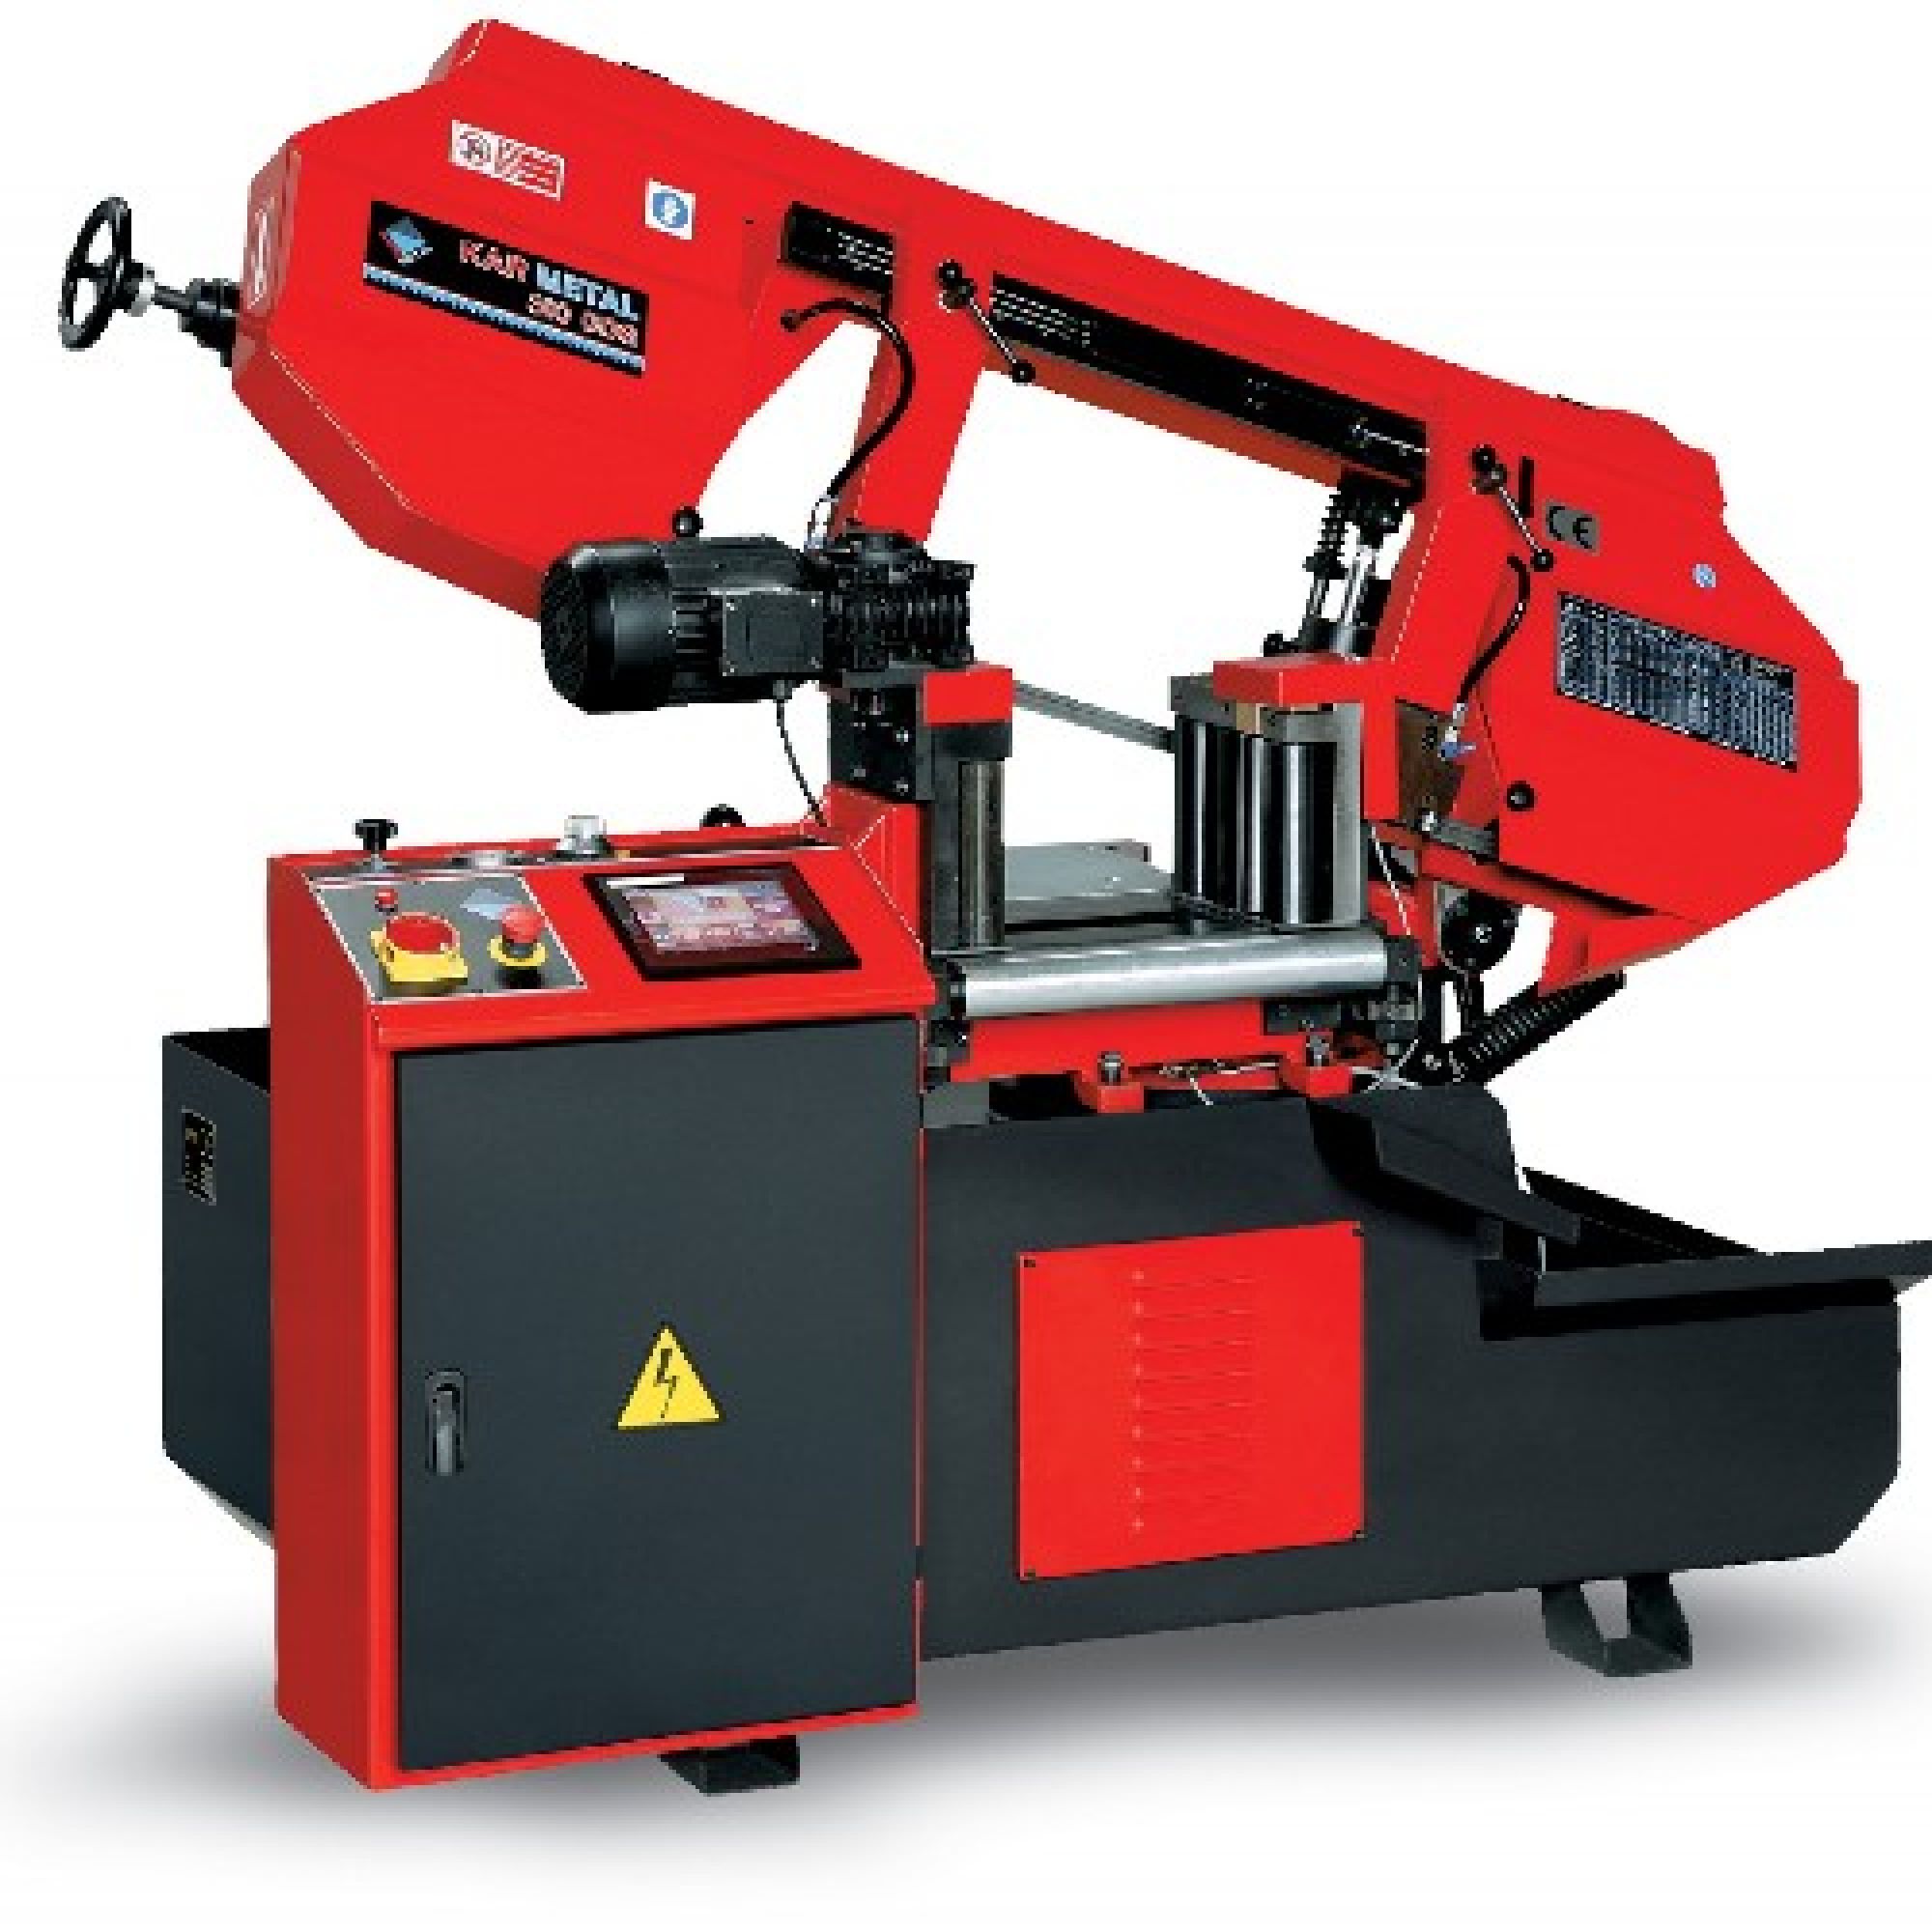 SD ODG 300x340 PLC Automatic Bandsaw